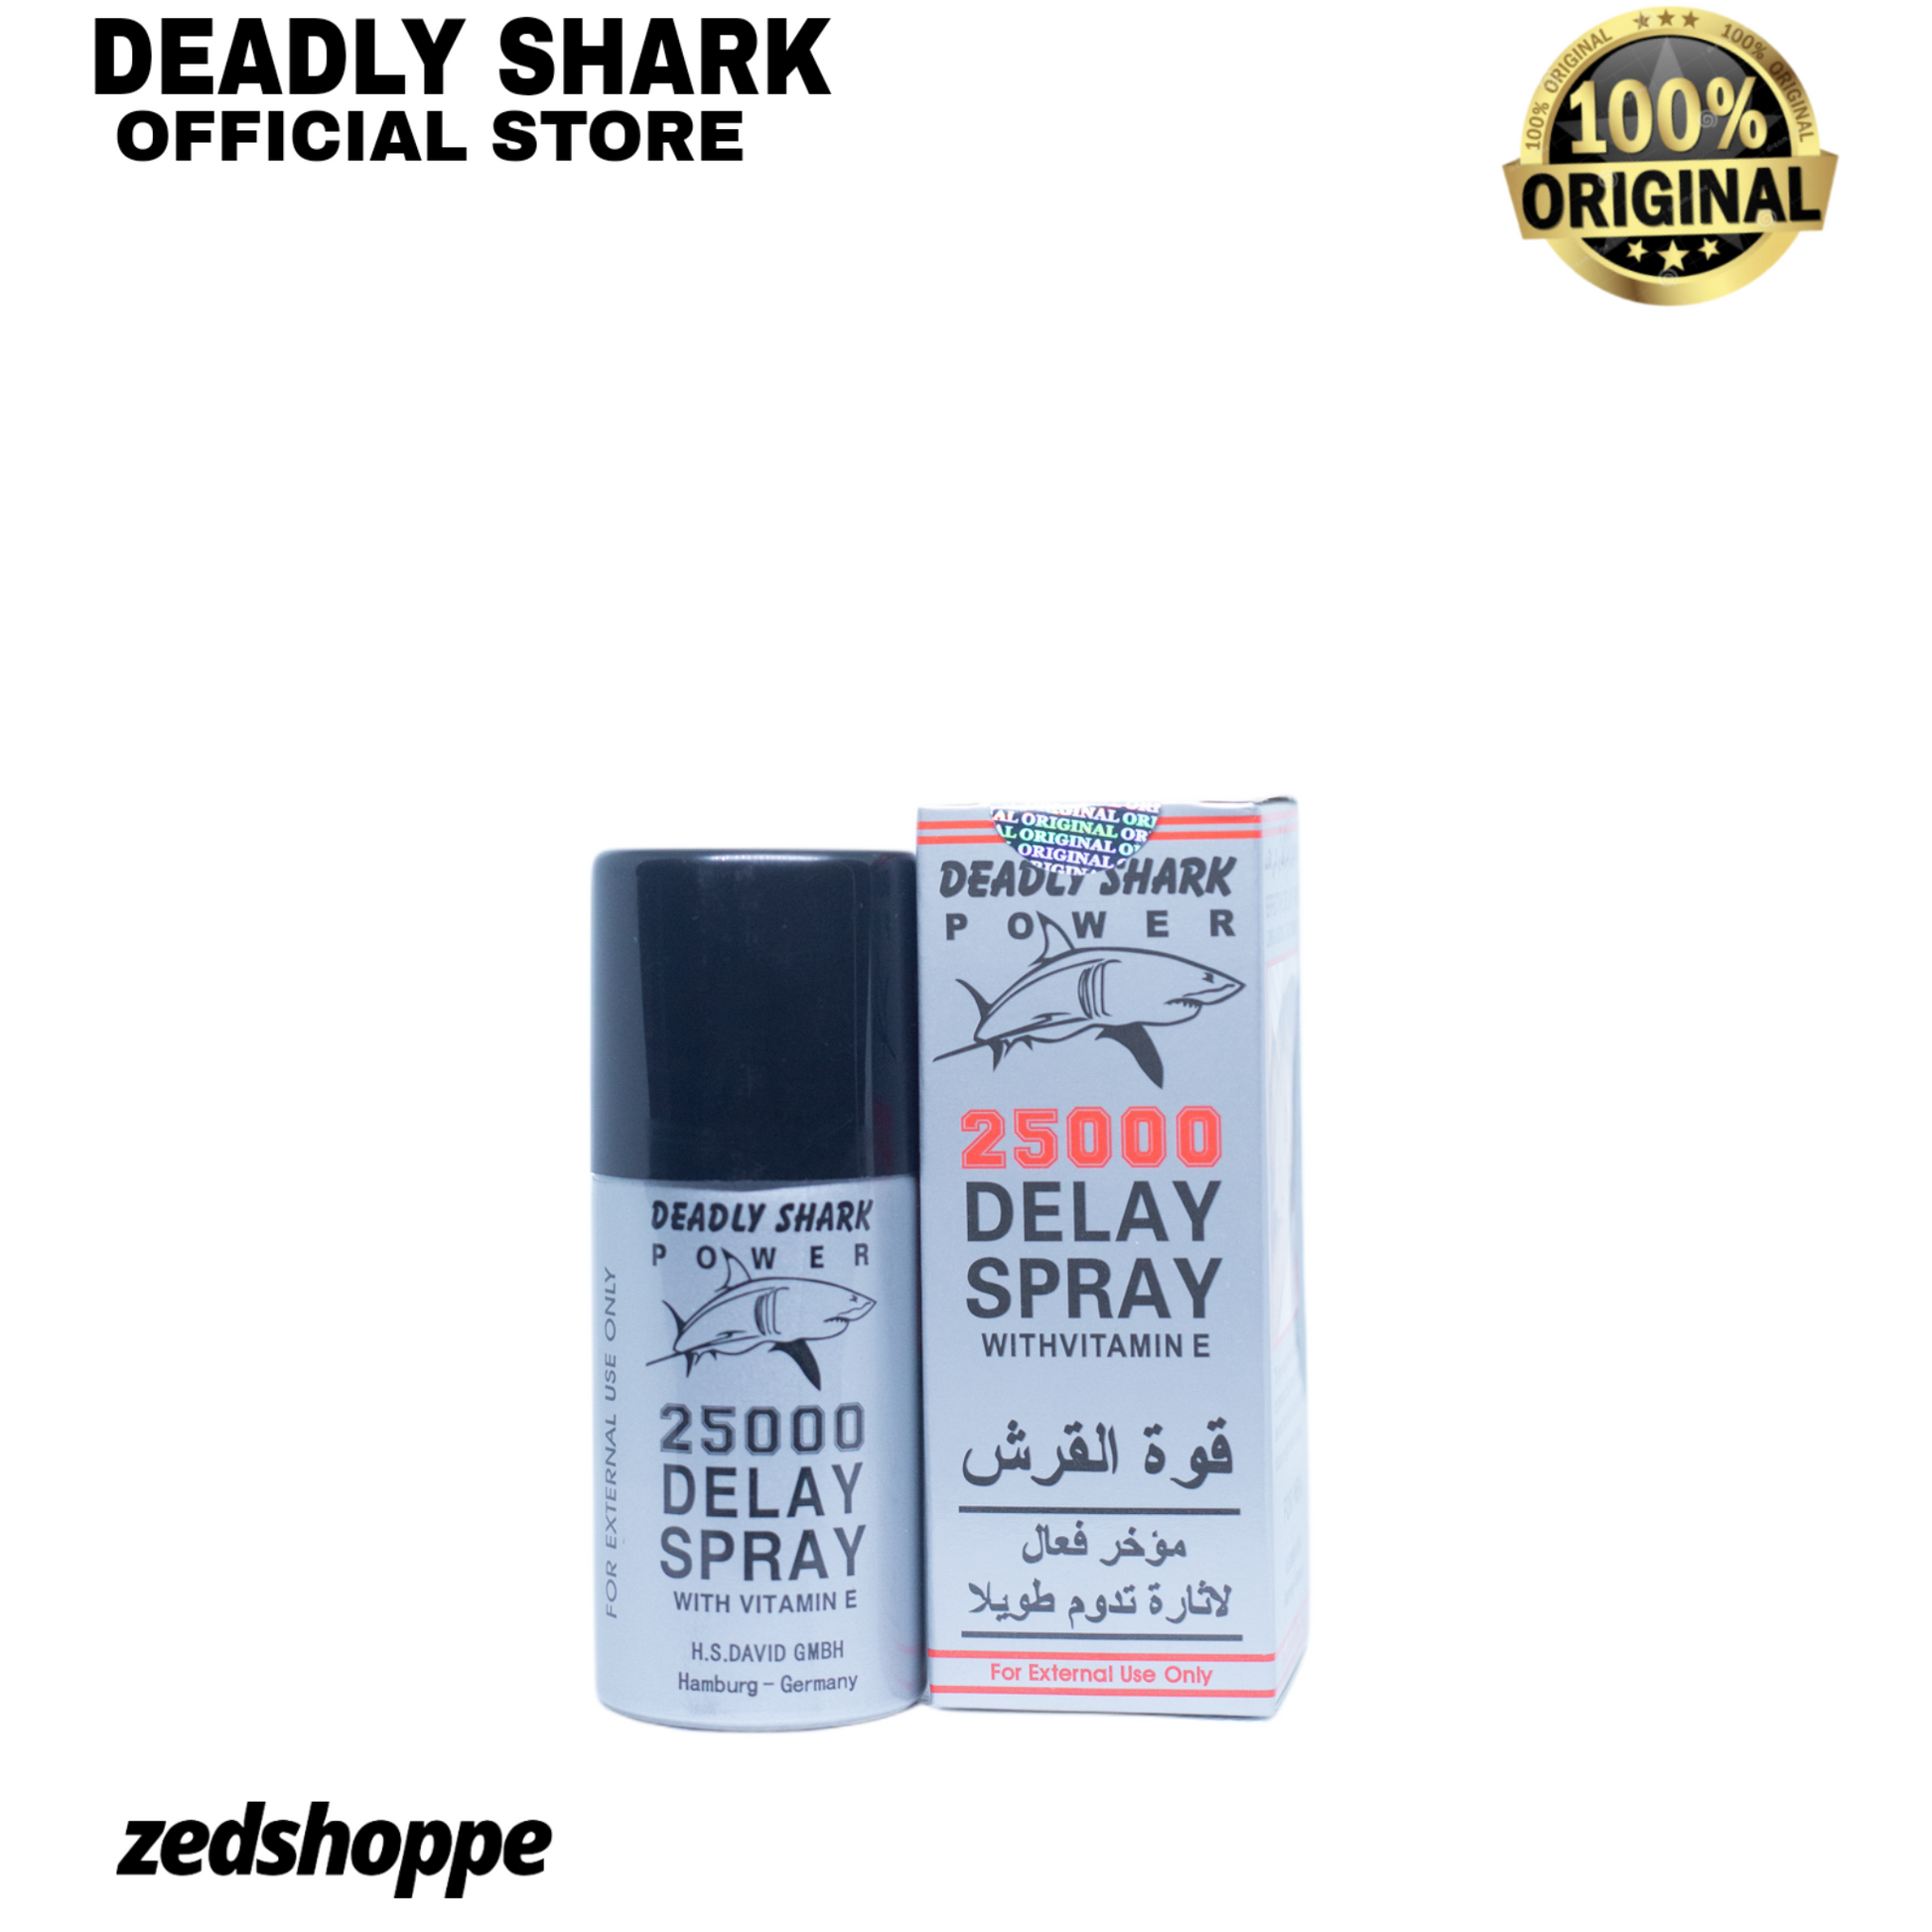 Deadly Shark Power 25000 Long Timing Delay Spray With Vitamin E For Men In Pakistan.